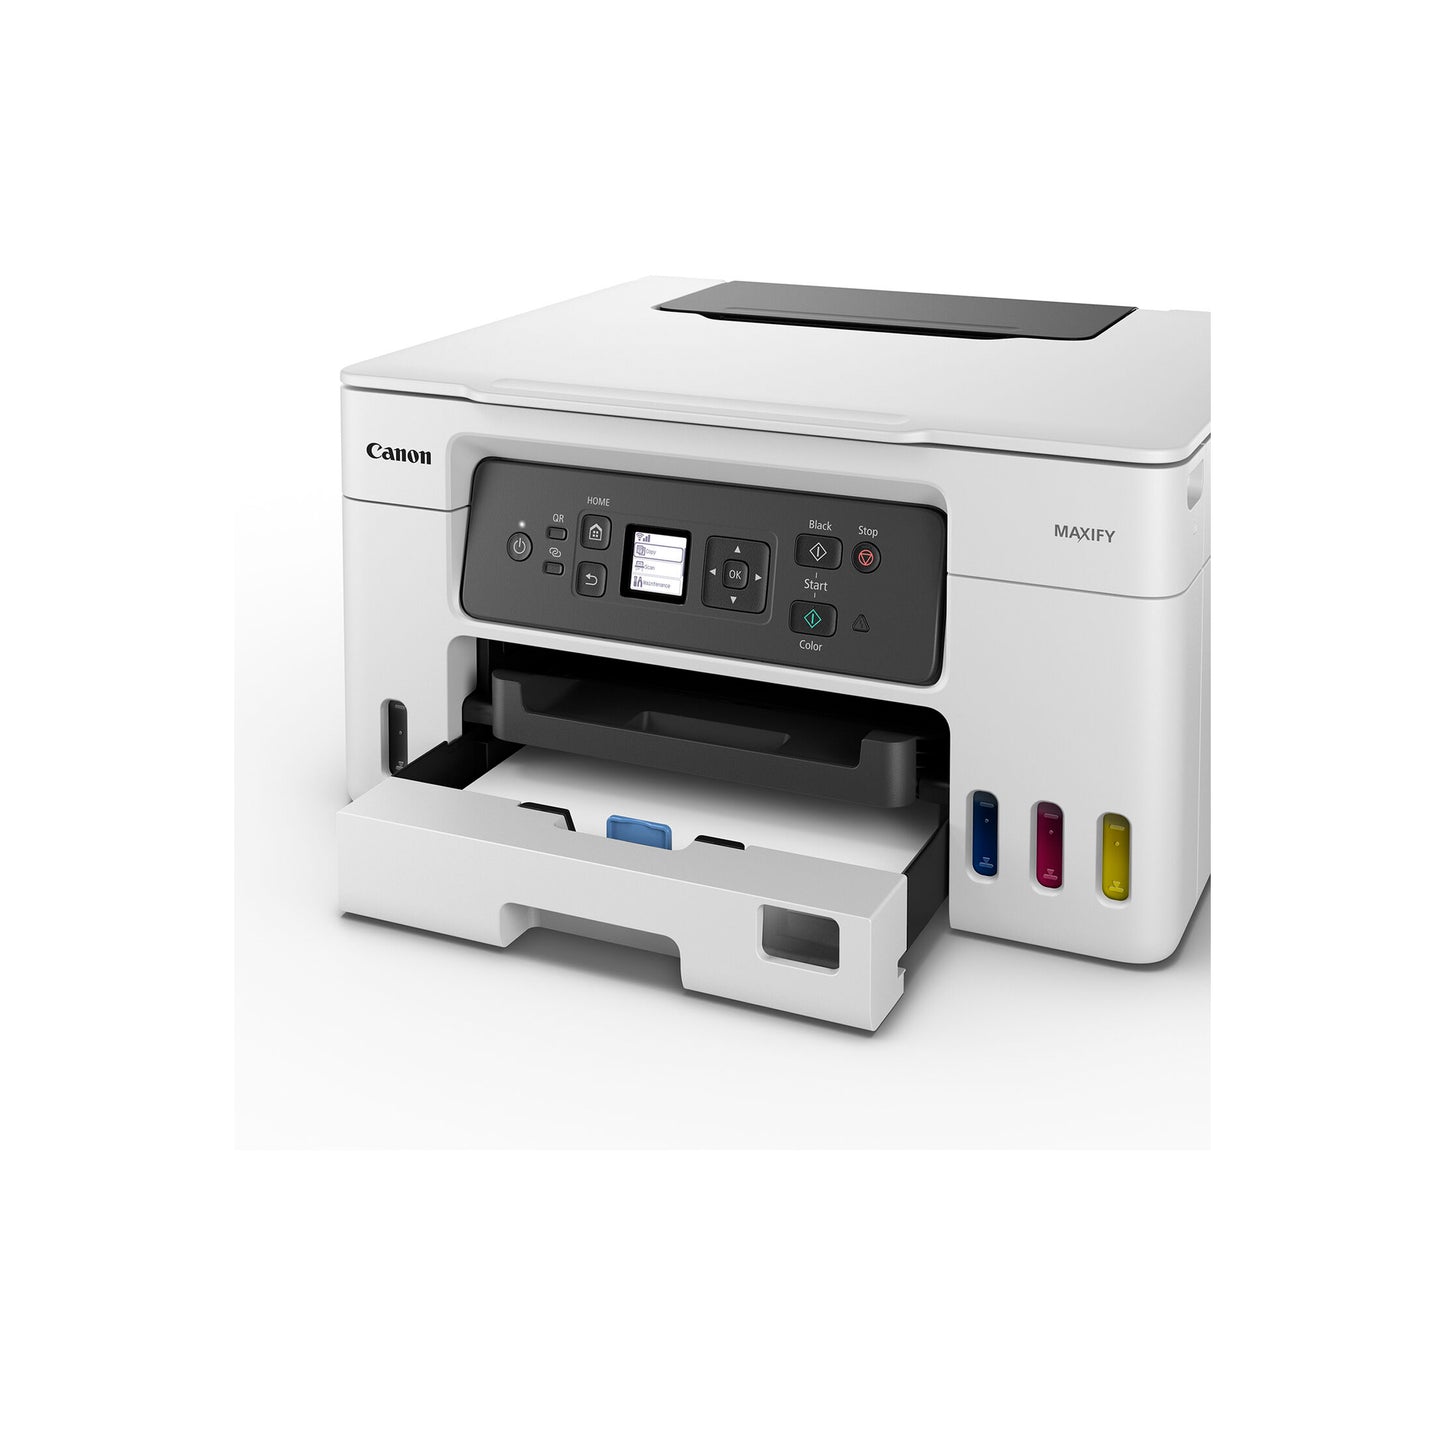 MegaTank MAXIFY GX3020 Wireless Small Office All-in-One Printer